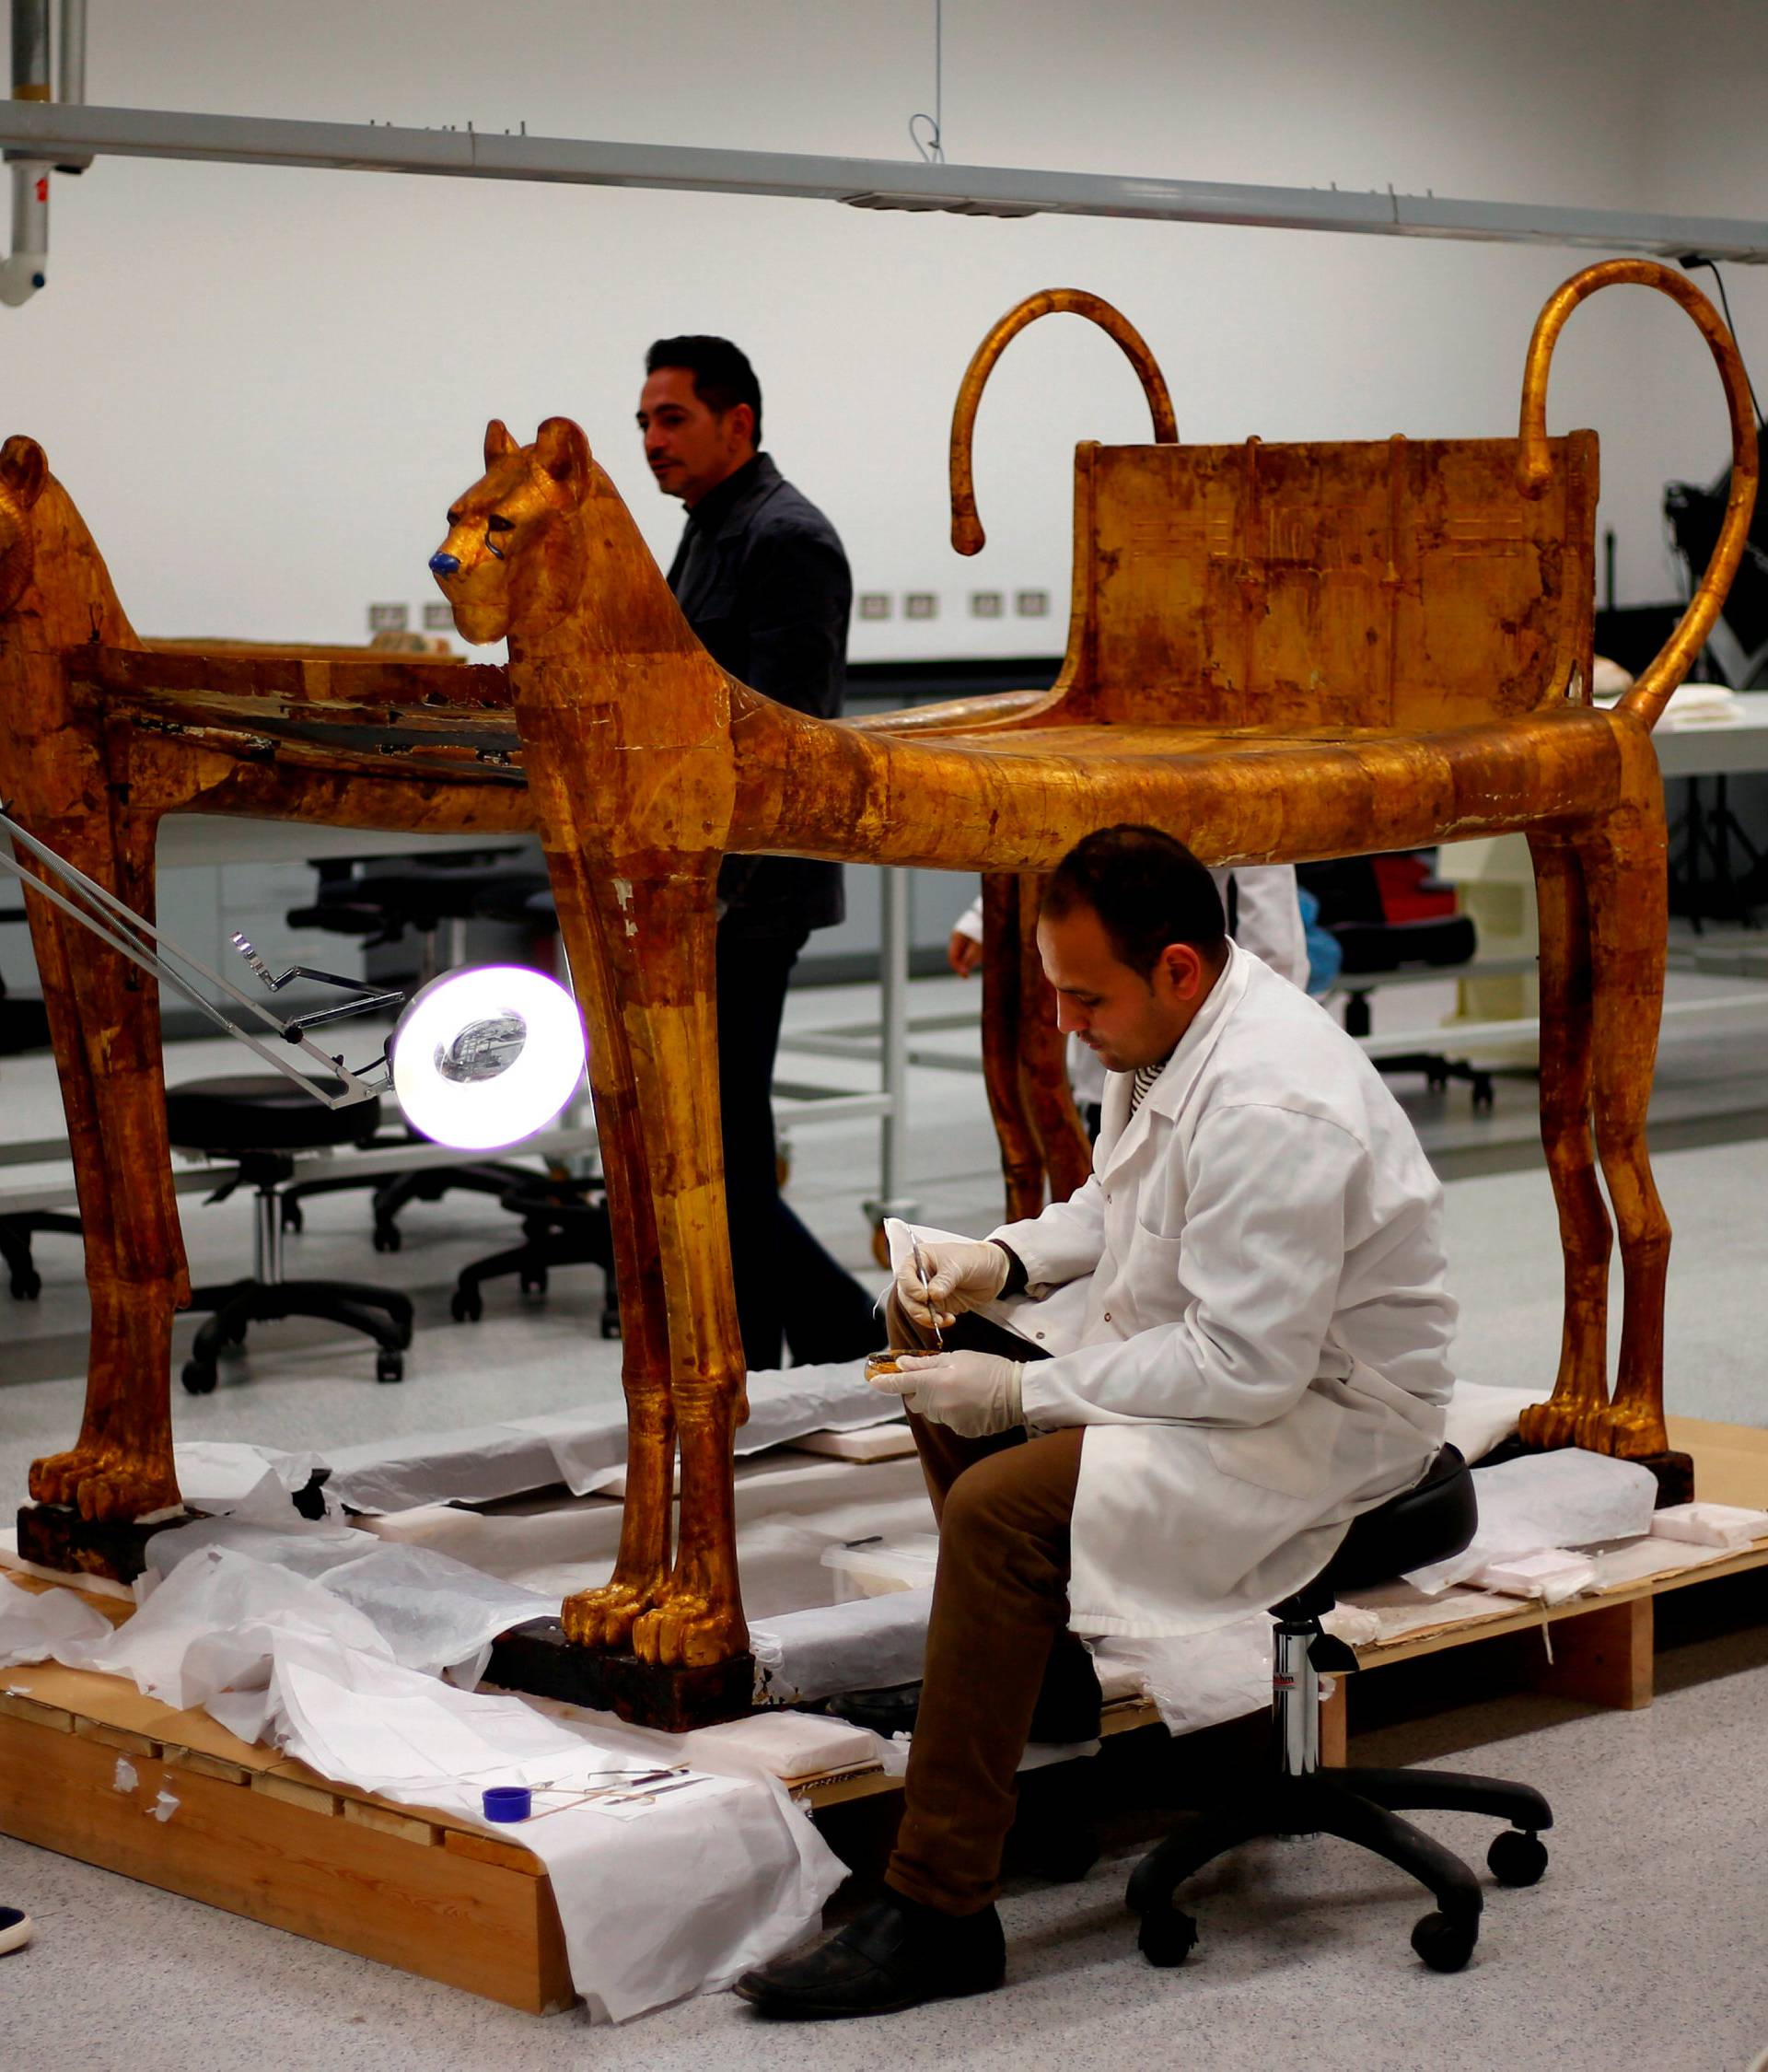 General manager of technical affairs Hussien Kamal looks on as the archaeological technicians work on the artefacts which belonged to The Golden King Tutankhamun, in the conservation centre of the Grand Egyptian Museum, on the outskirts of Cairo